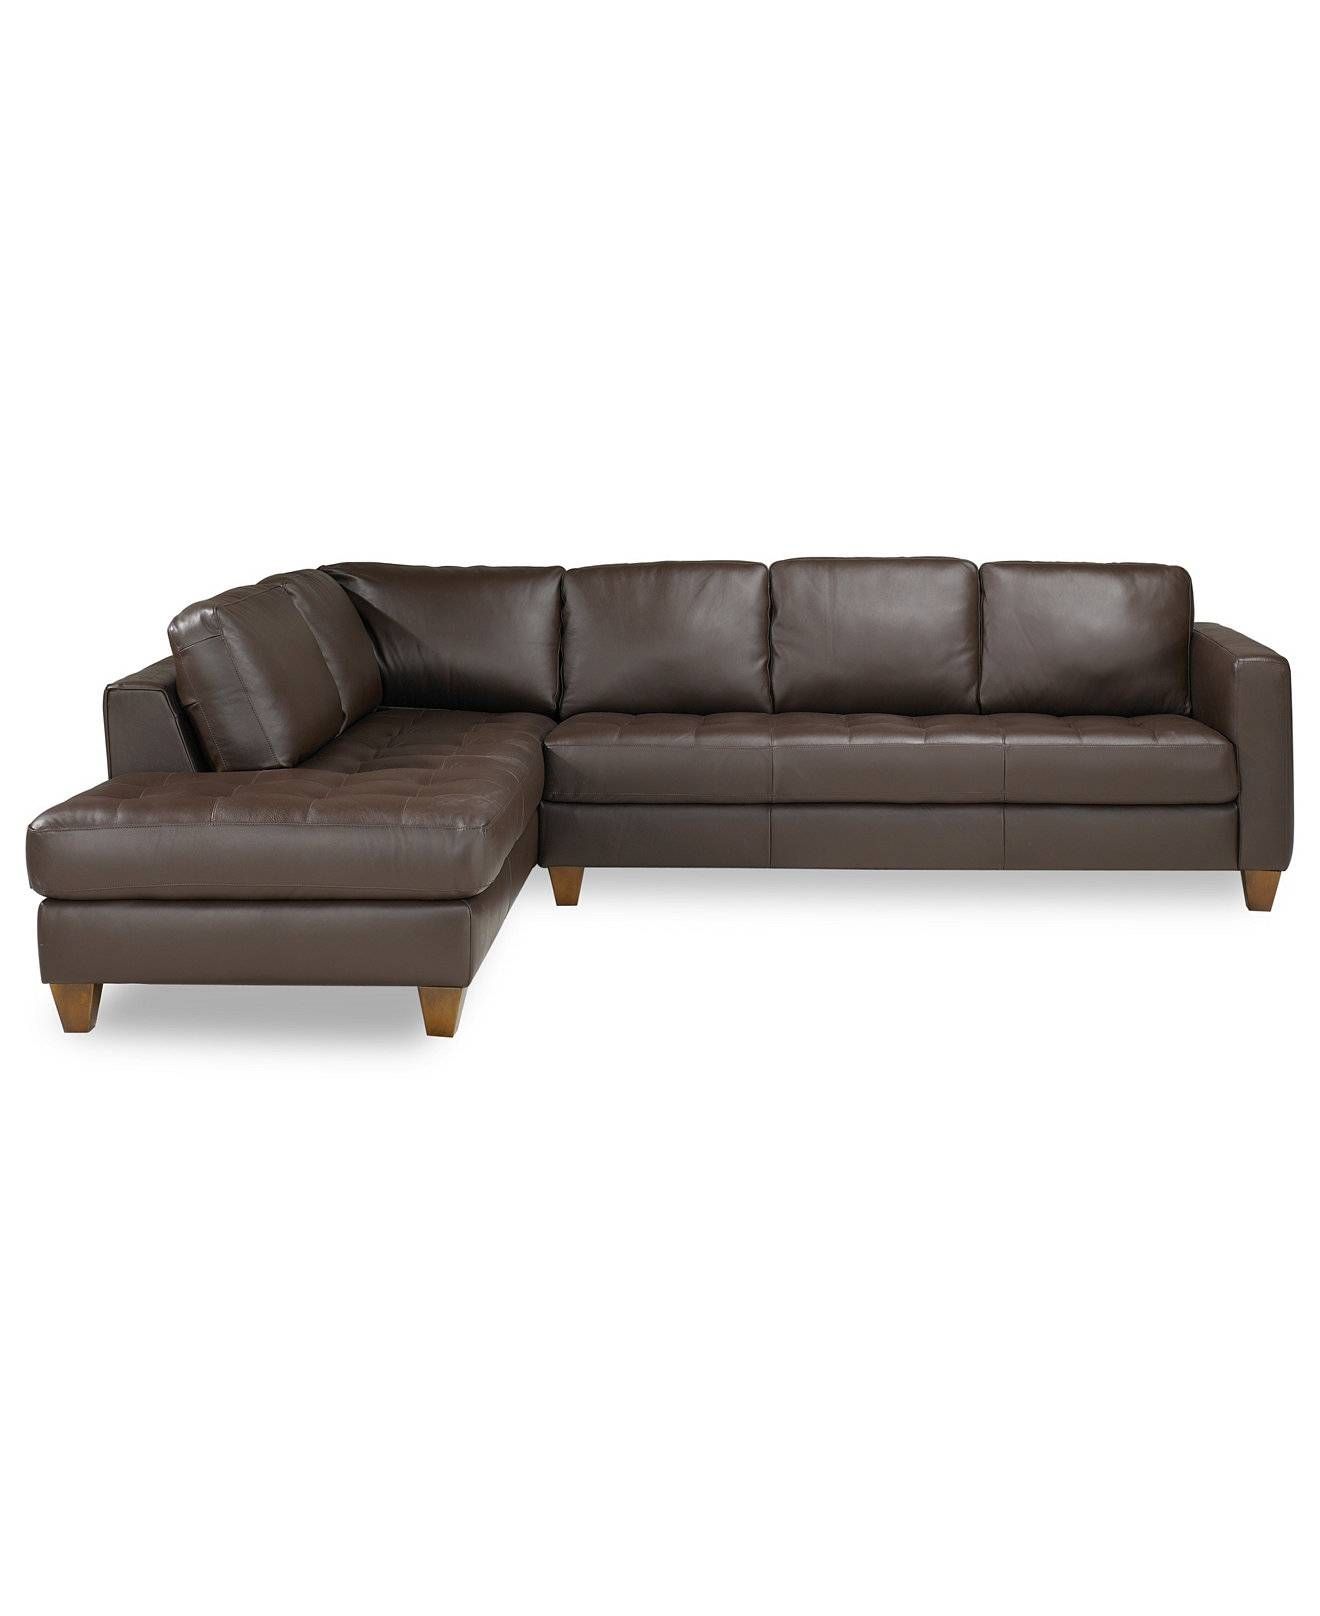 Inspiring Macys Leather Sectional 51 On Online With Macys Leather With Macys Leather Sectional Sofa (View 9 of 25)